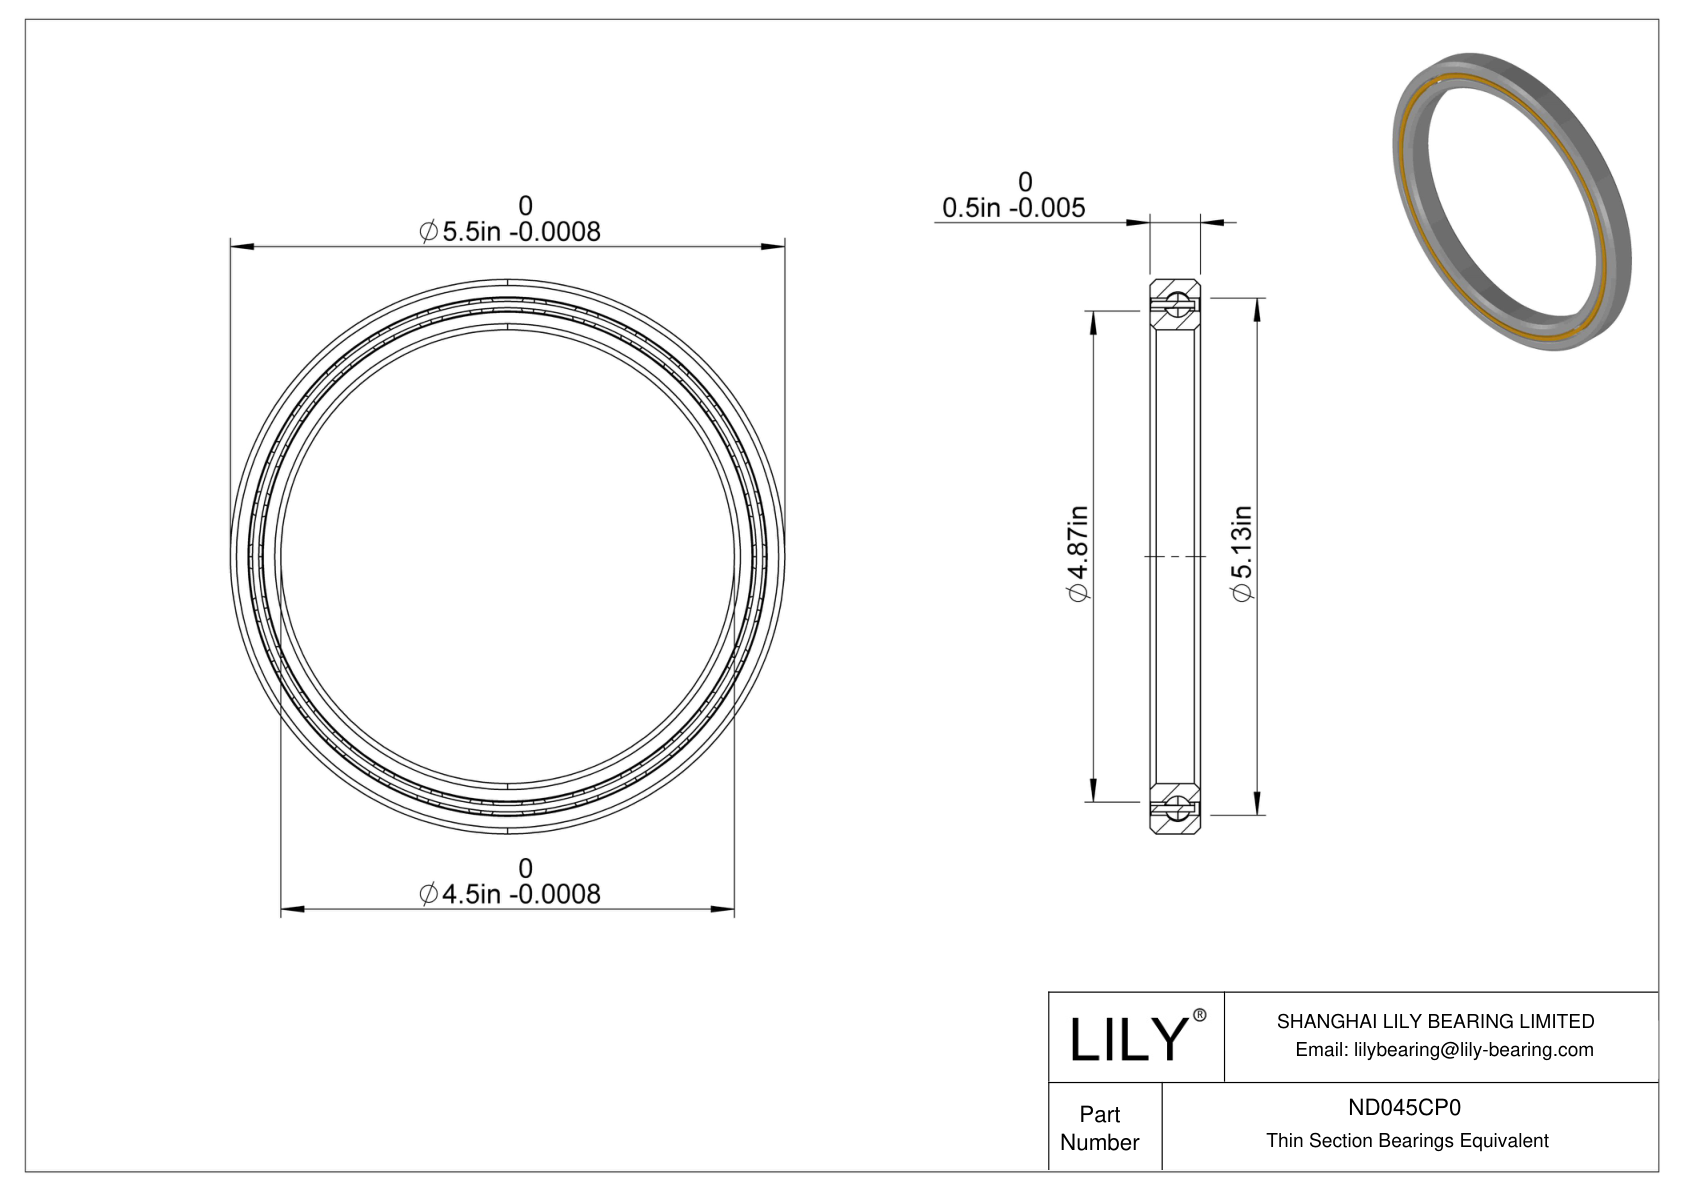 ND045CP0 Constant Section (CS) Bearings cad drawing